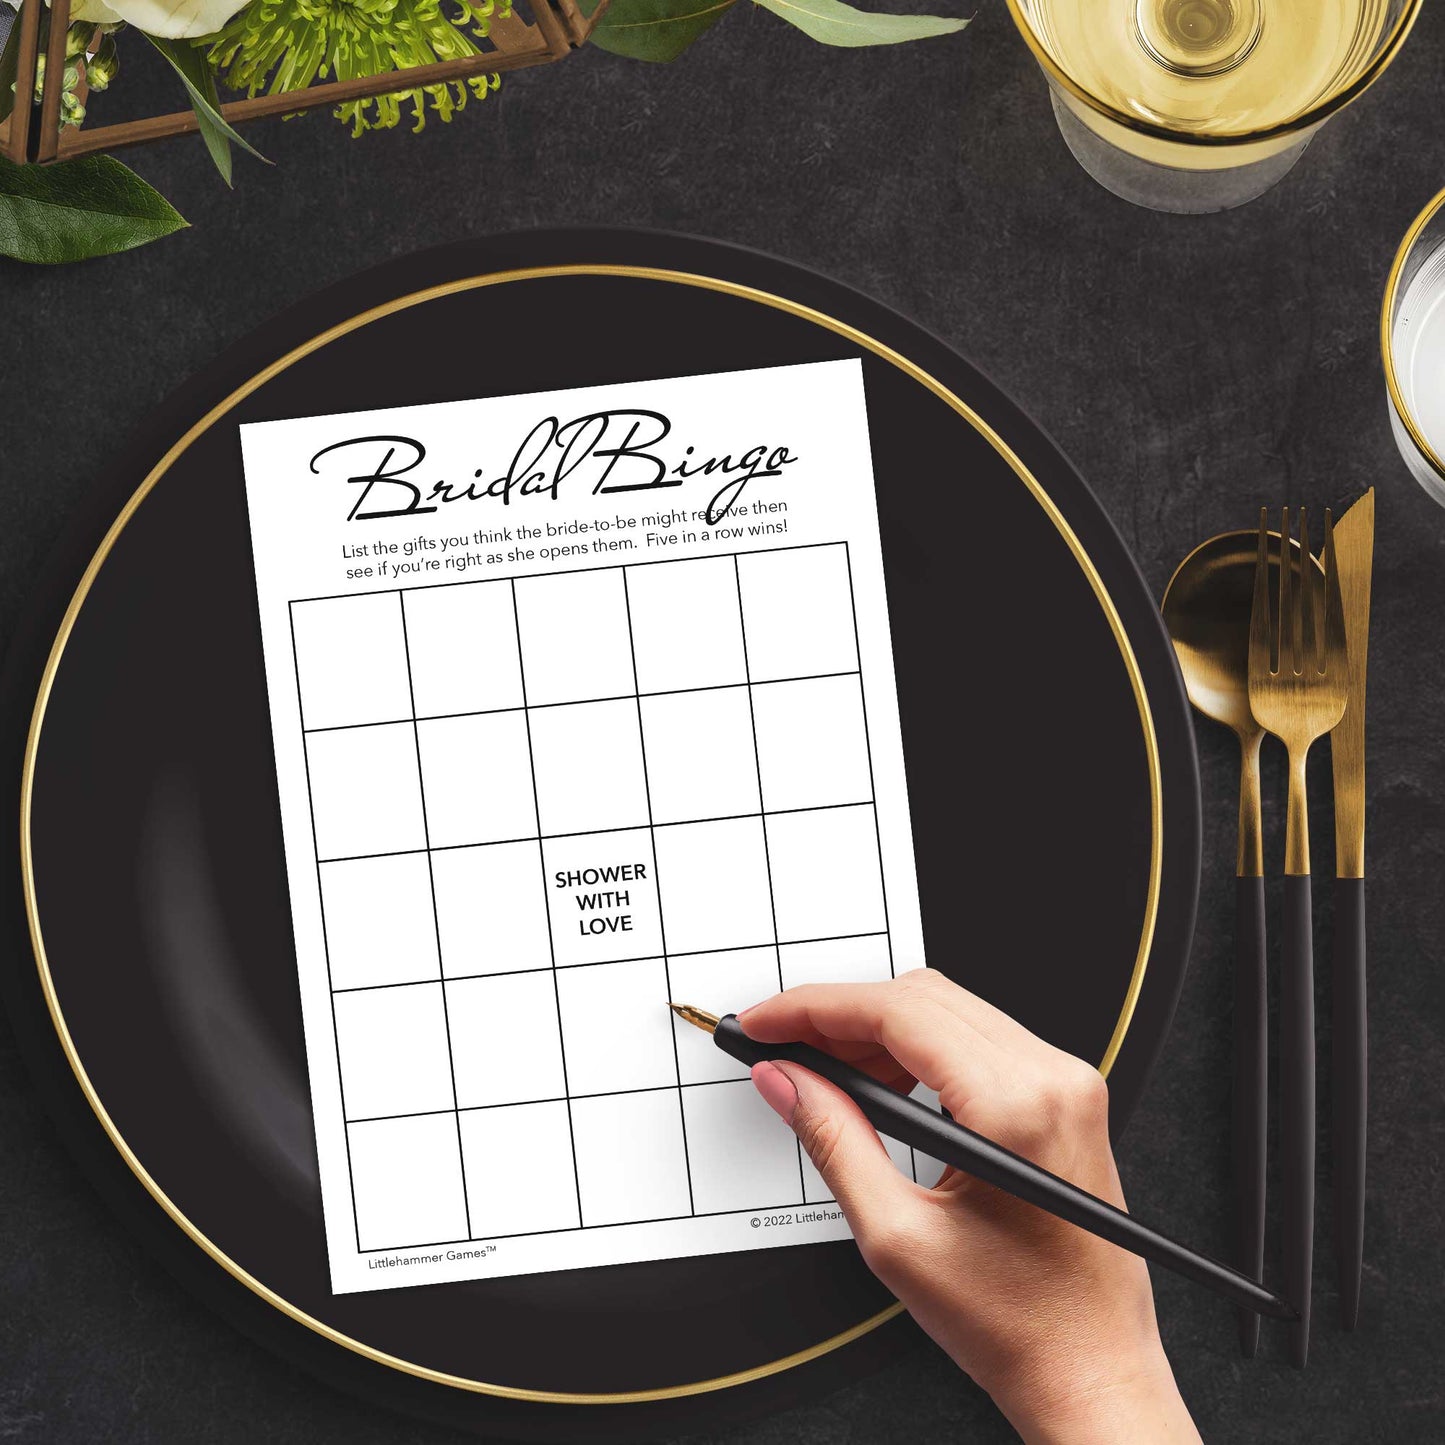 Woman with a pen sitting at a dark place setting with a black and gold plate filling out a minimalist black and white Bridal Gift Bingo card